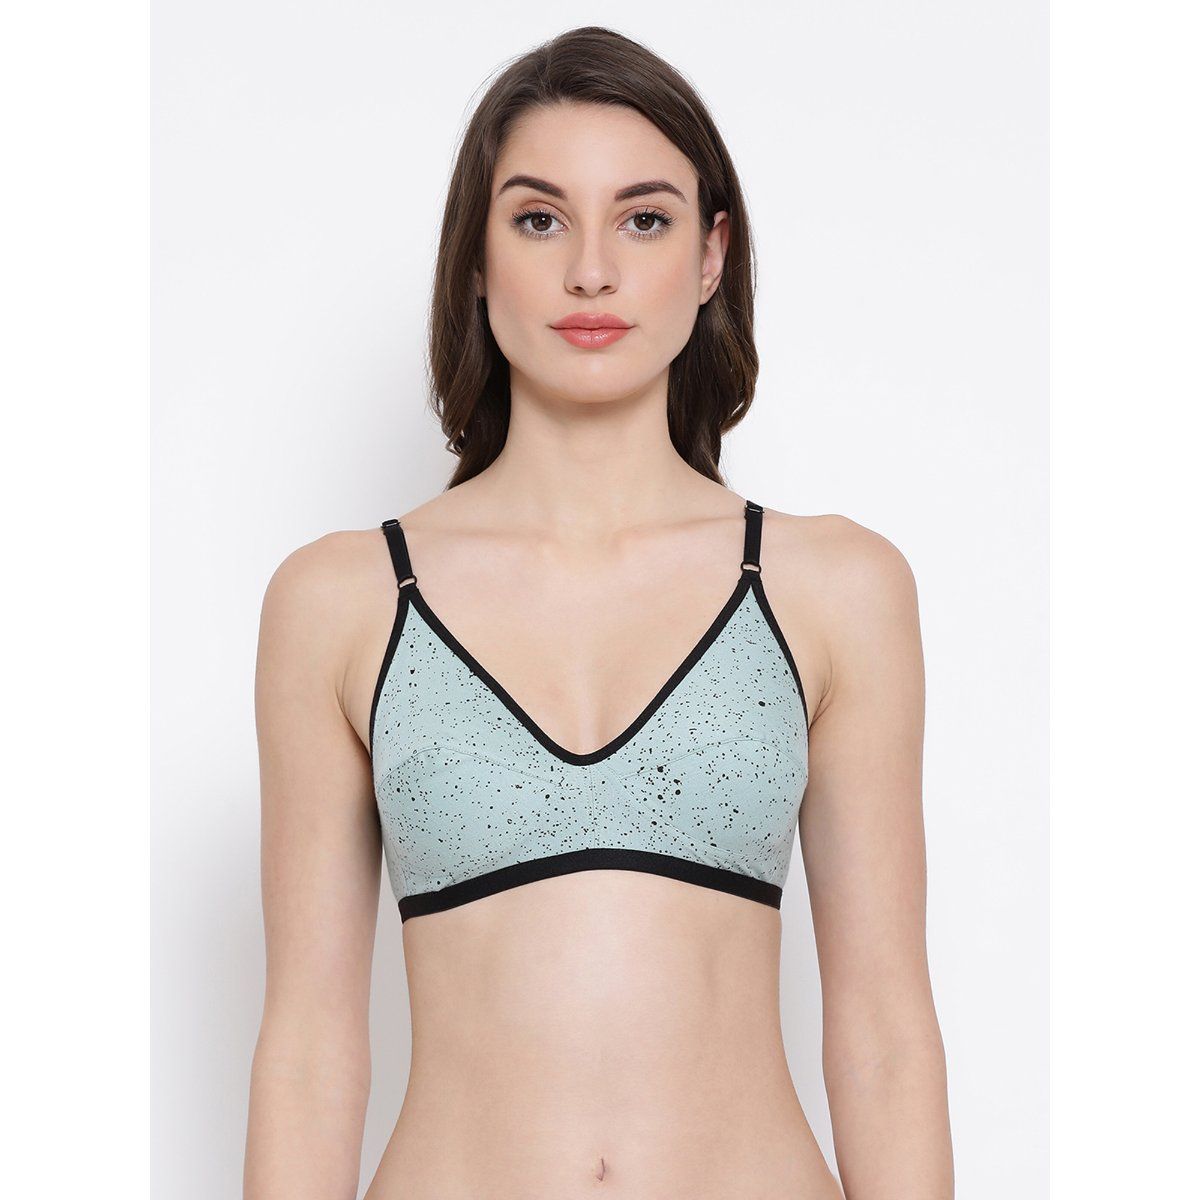 Buy Clovia Lace Lightly Padded Full Cup Wire Free Everyday Bra - Teal online